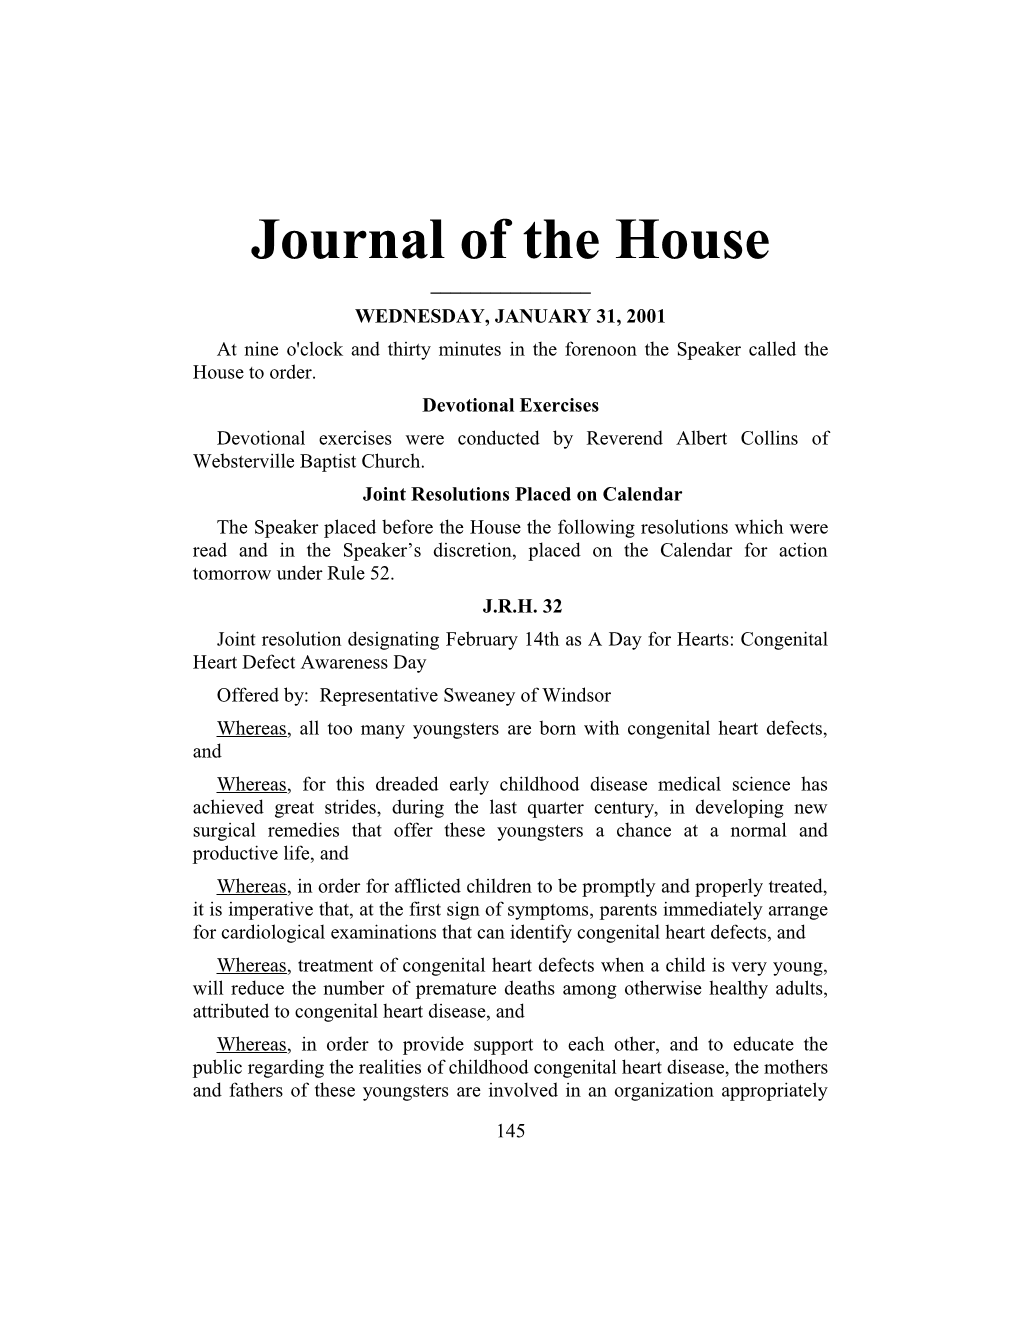 Journal of the House s6